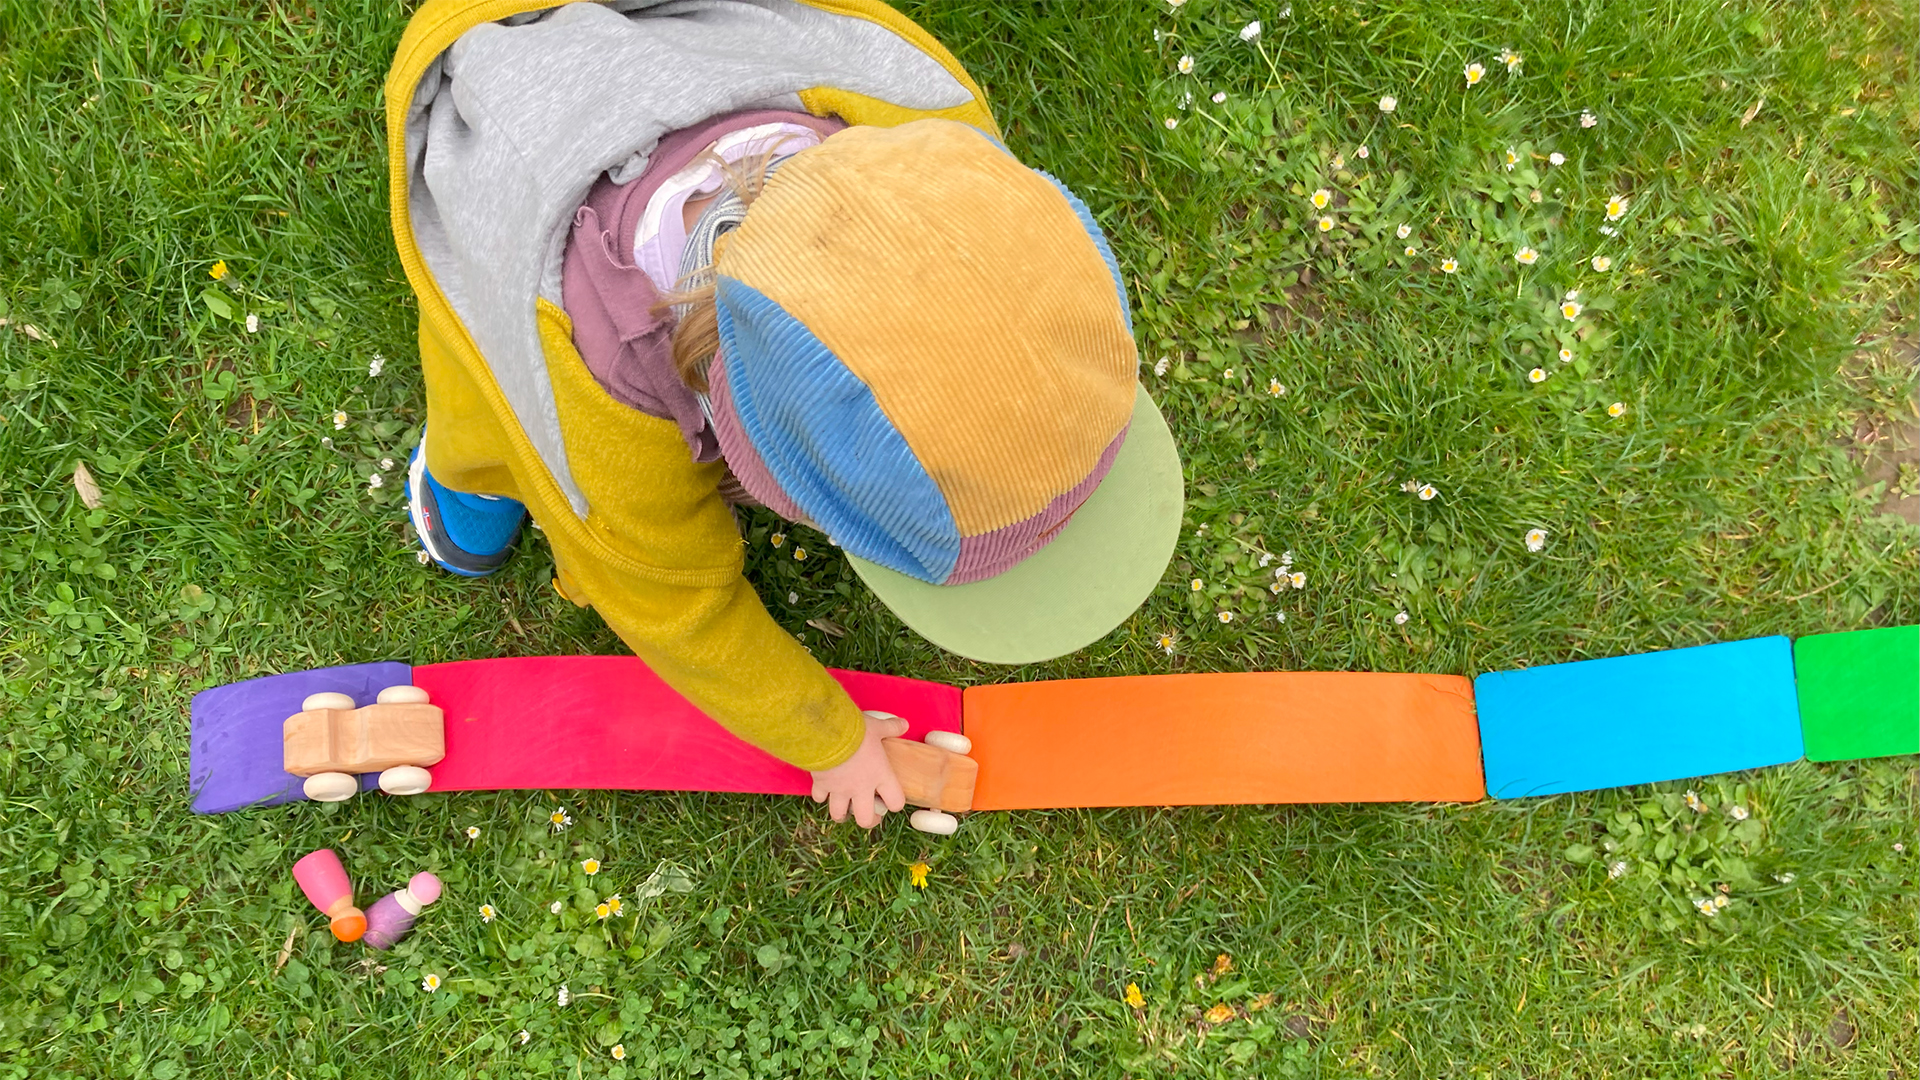 A child plays with wooden play cars on a meadow